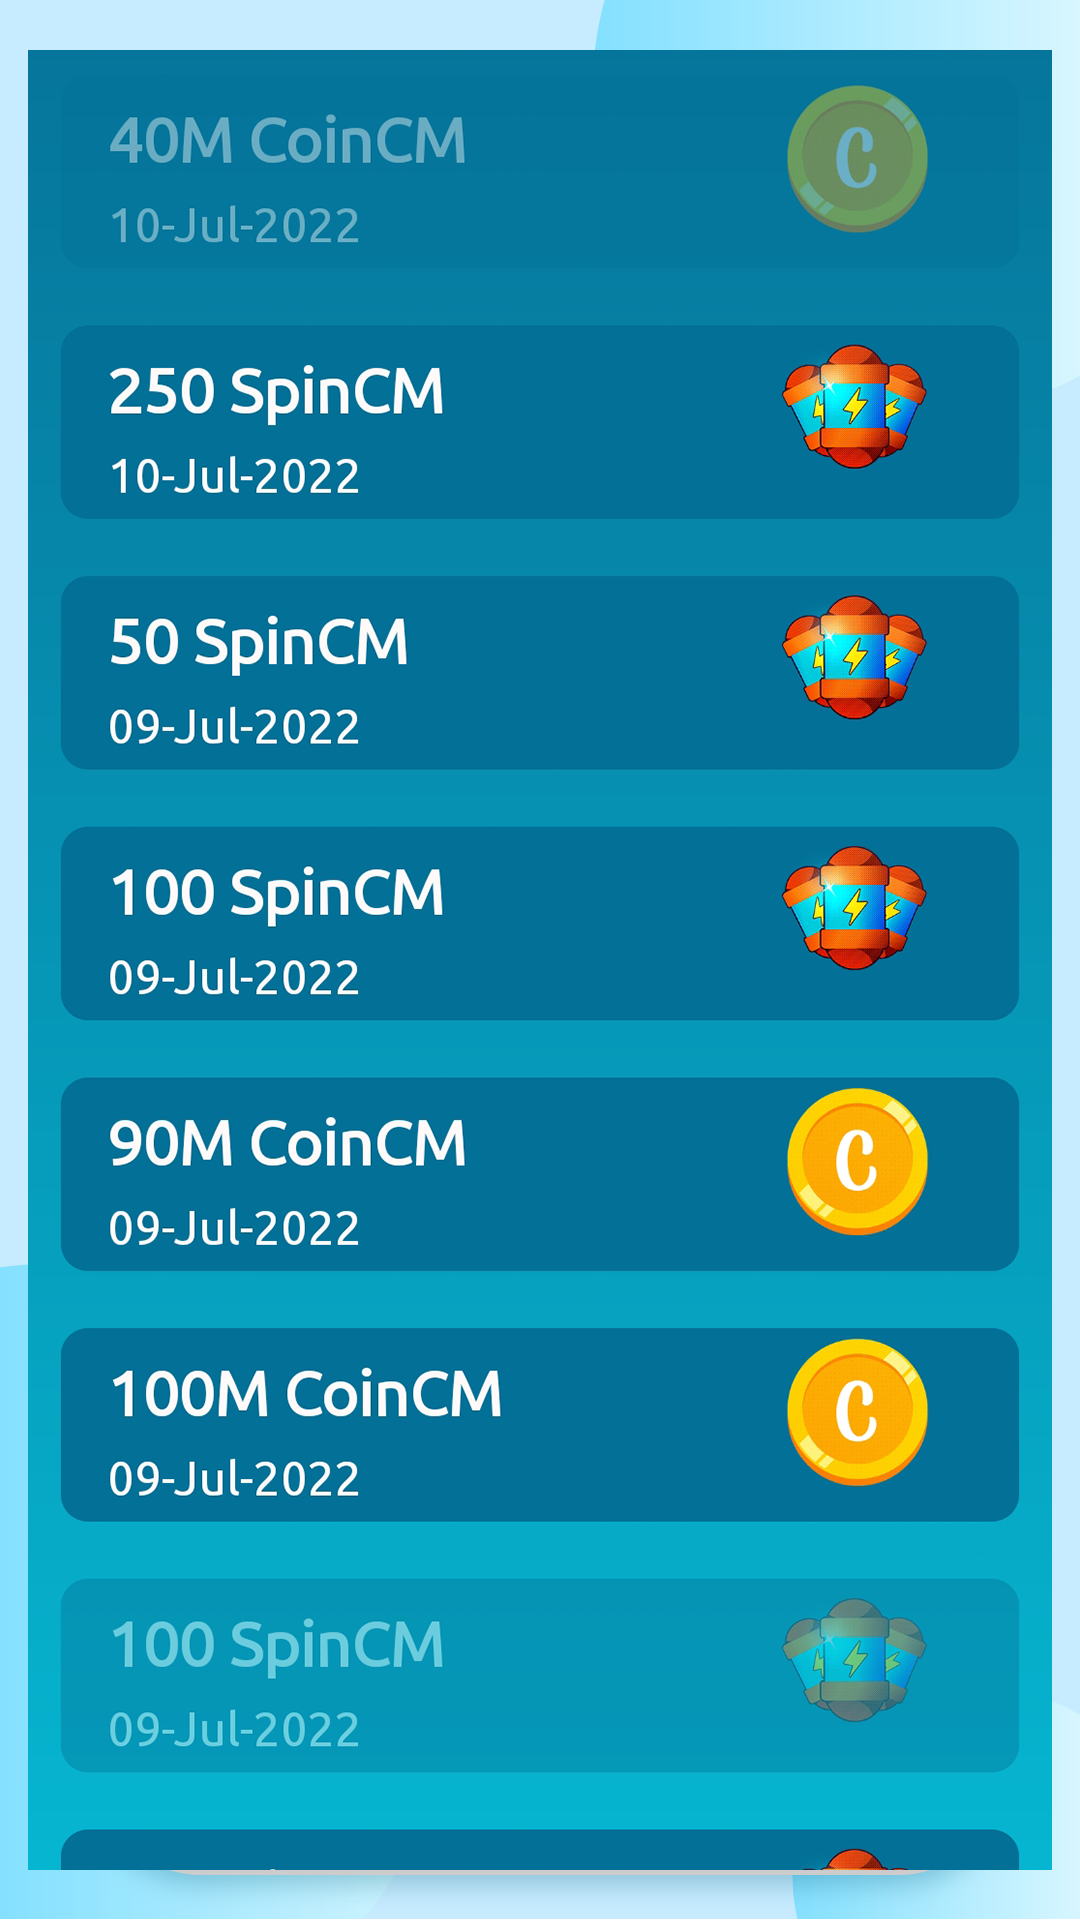 Coin Master: Free Spins & Coins Links (February ) - Updated - Dot Esports